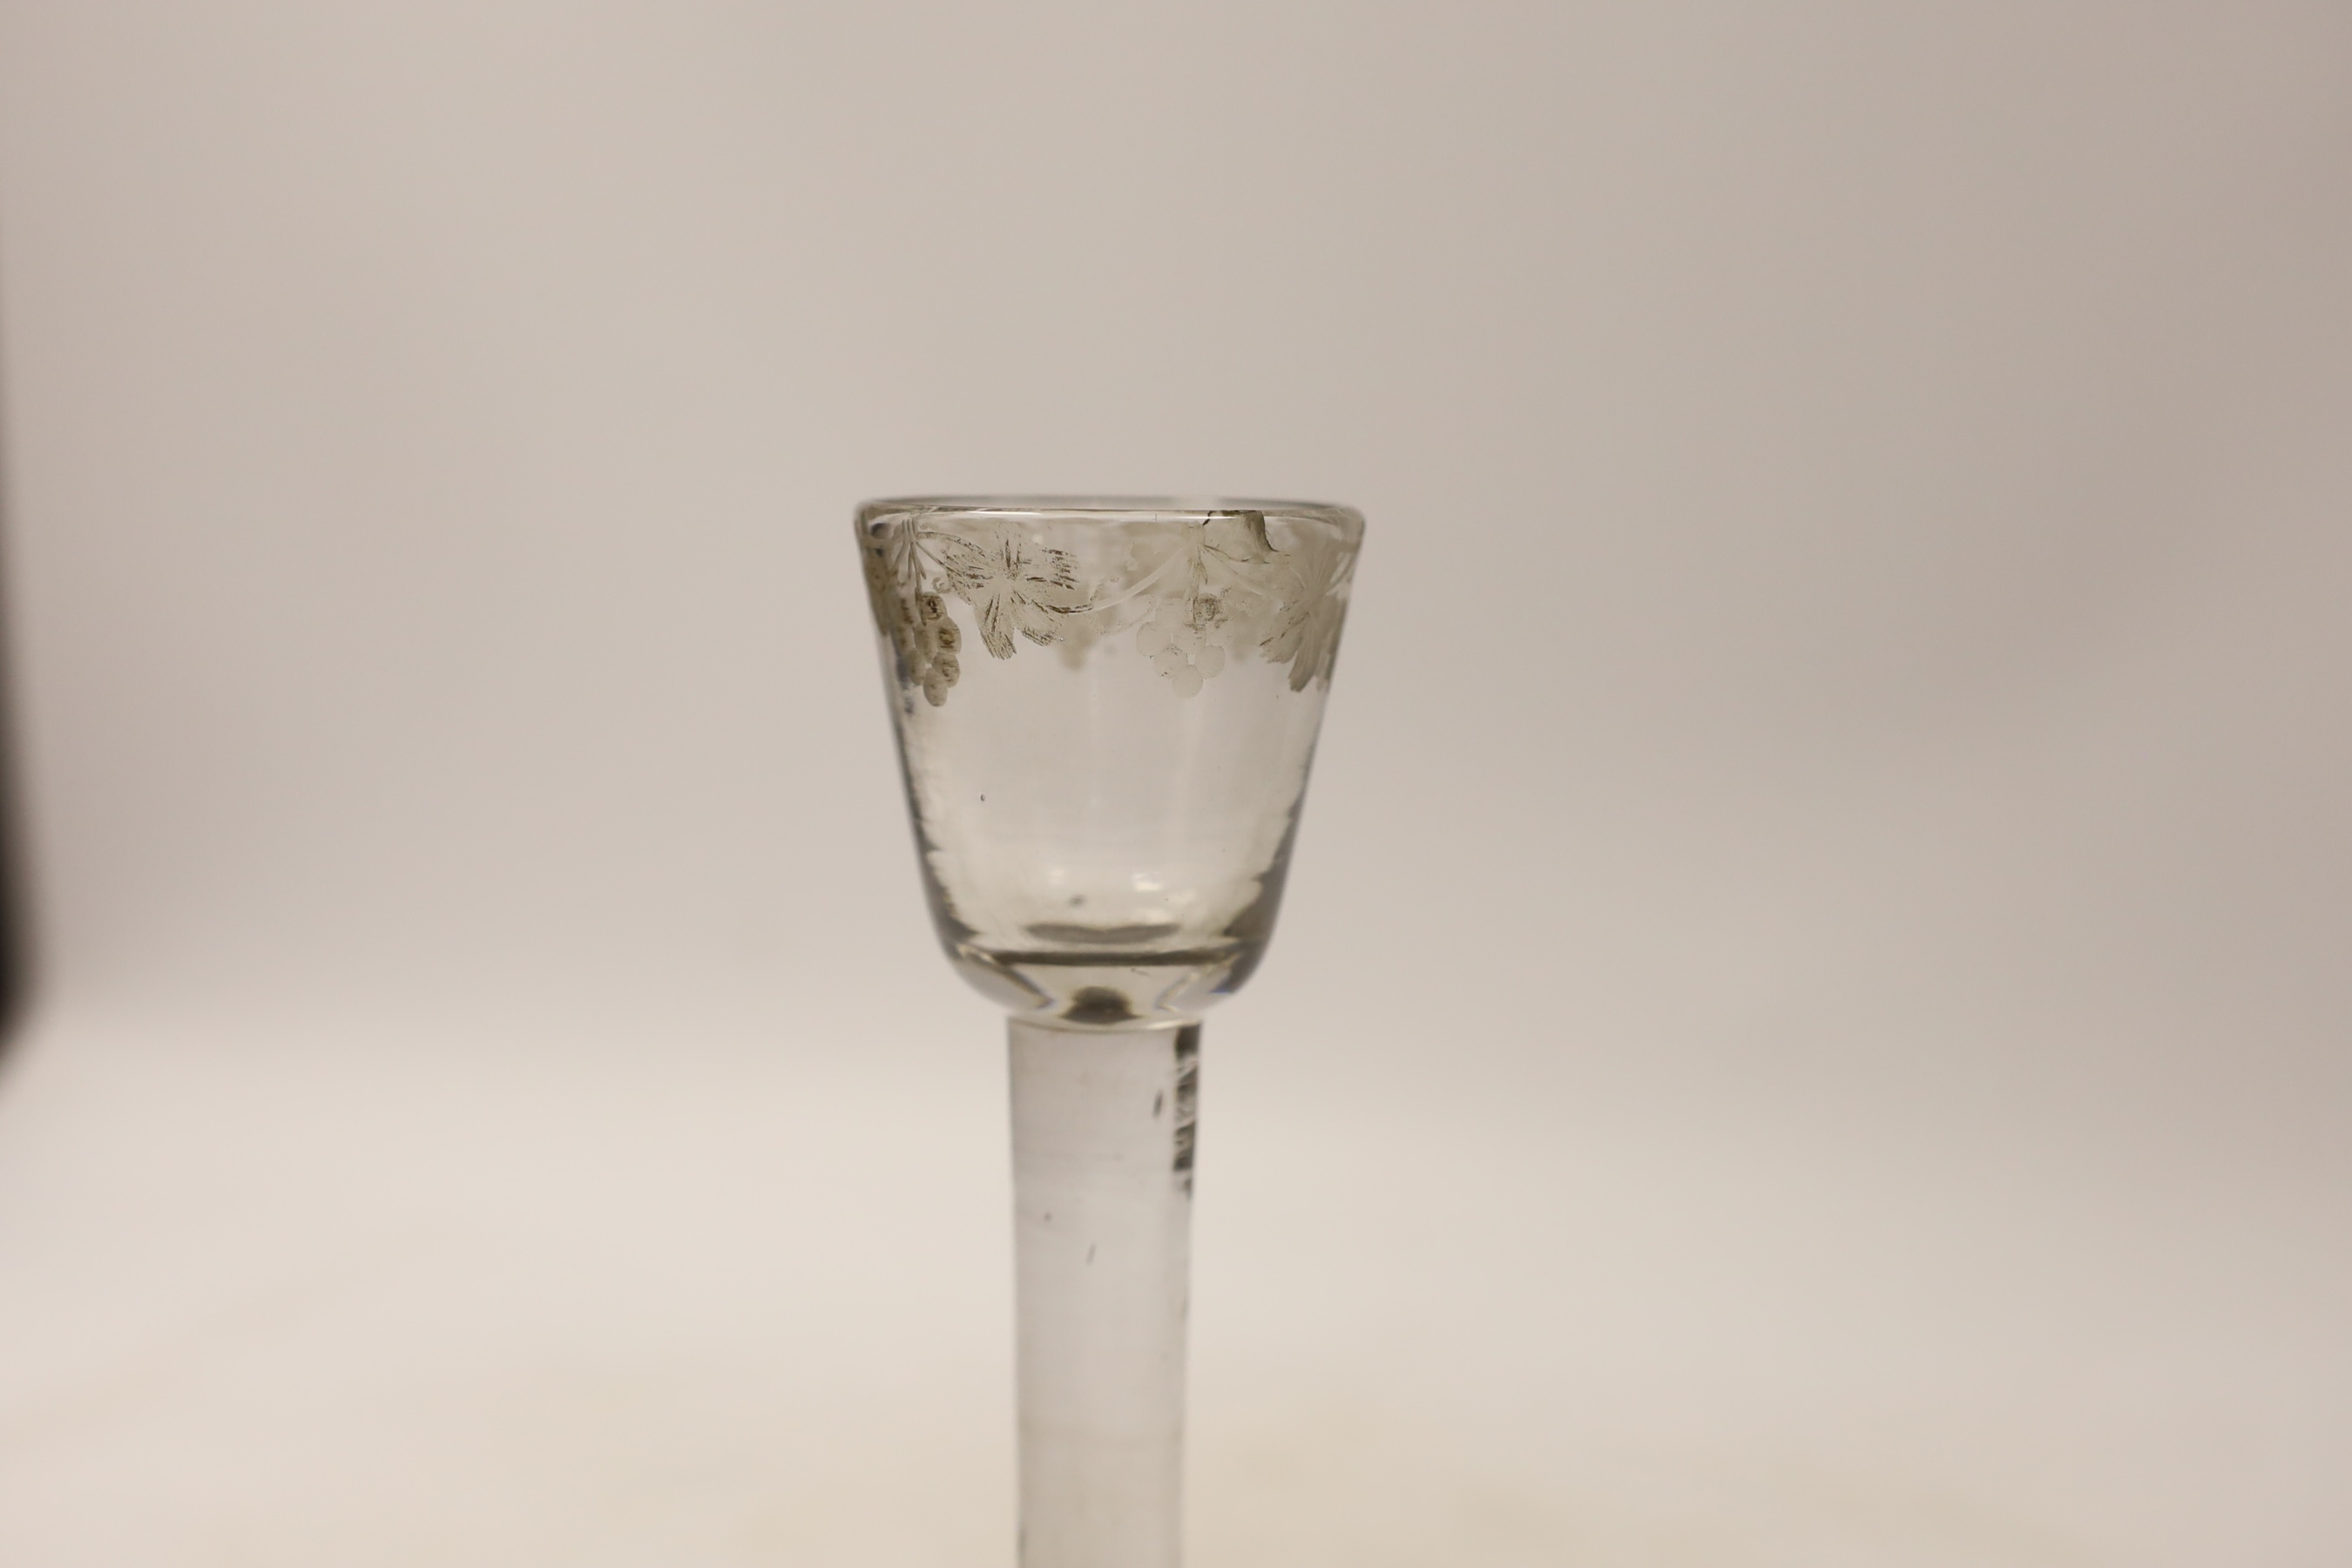 A George I or George II plain stem cordial glass, c.1720-30, with folded and domed foot and wheel engraved rim decorated with grape vines, 17.5cm